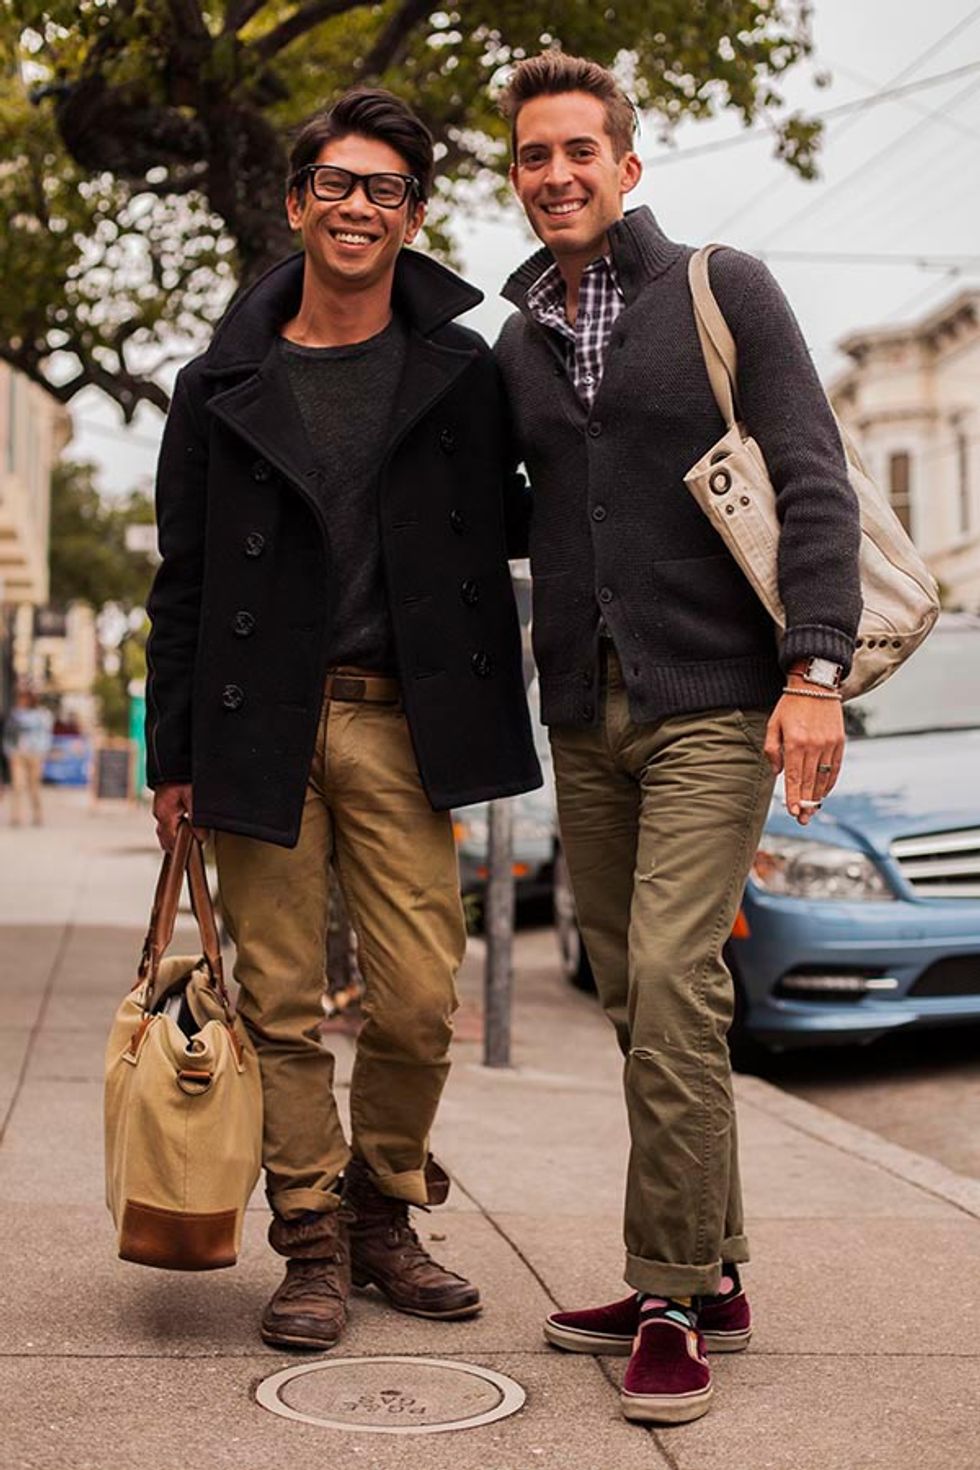 Street Style Report: A Gorgeous Newlywed Couple in Relaxed Layers, on Fillmore St.